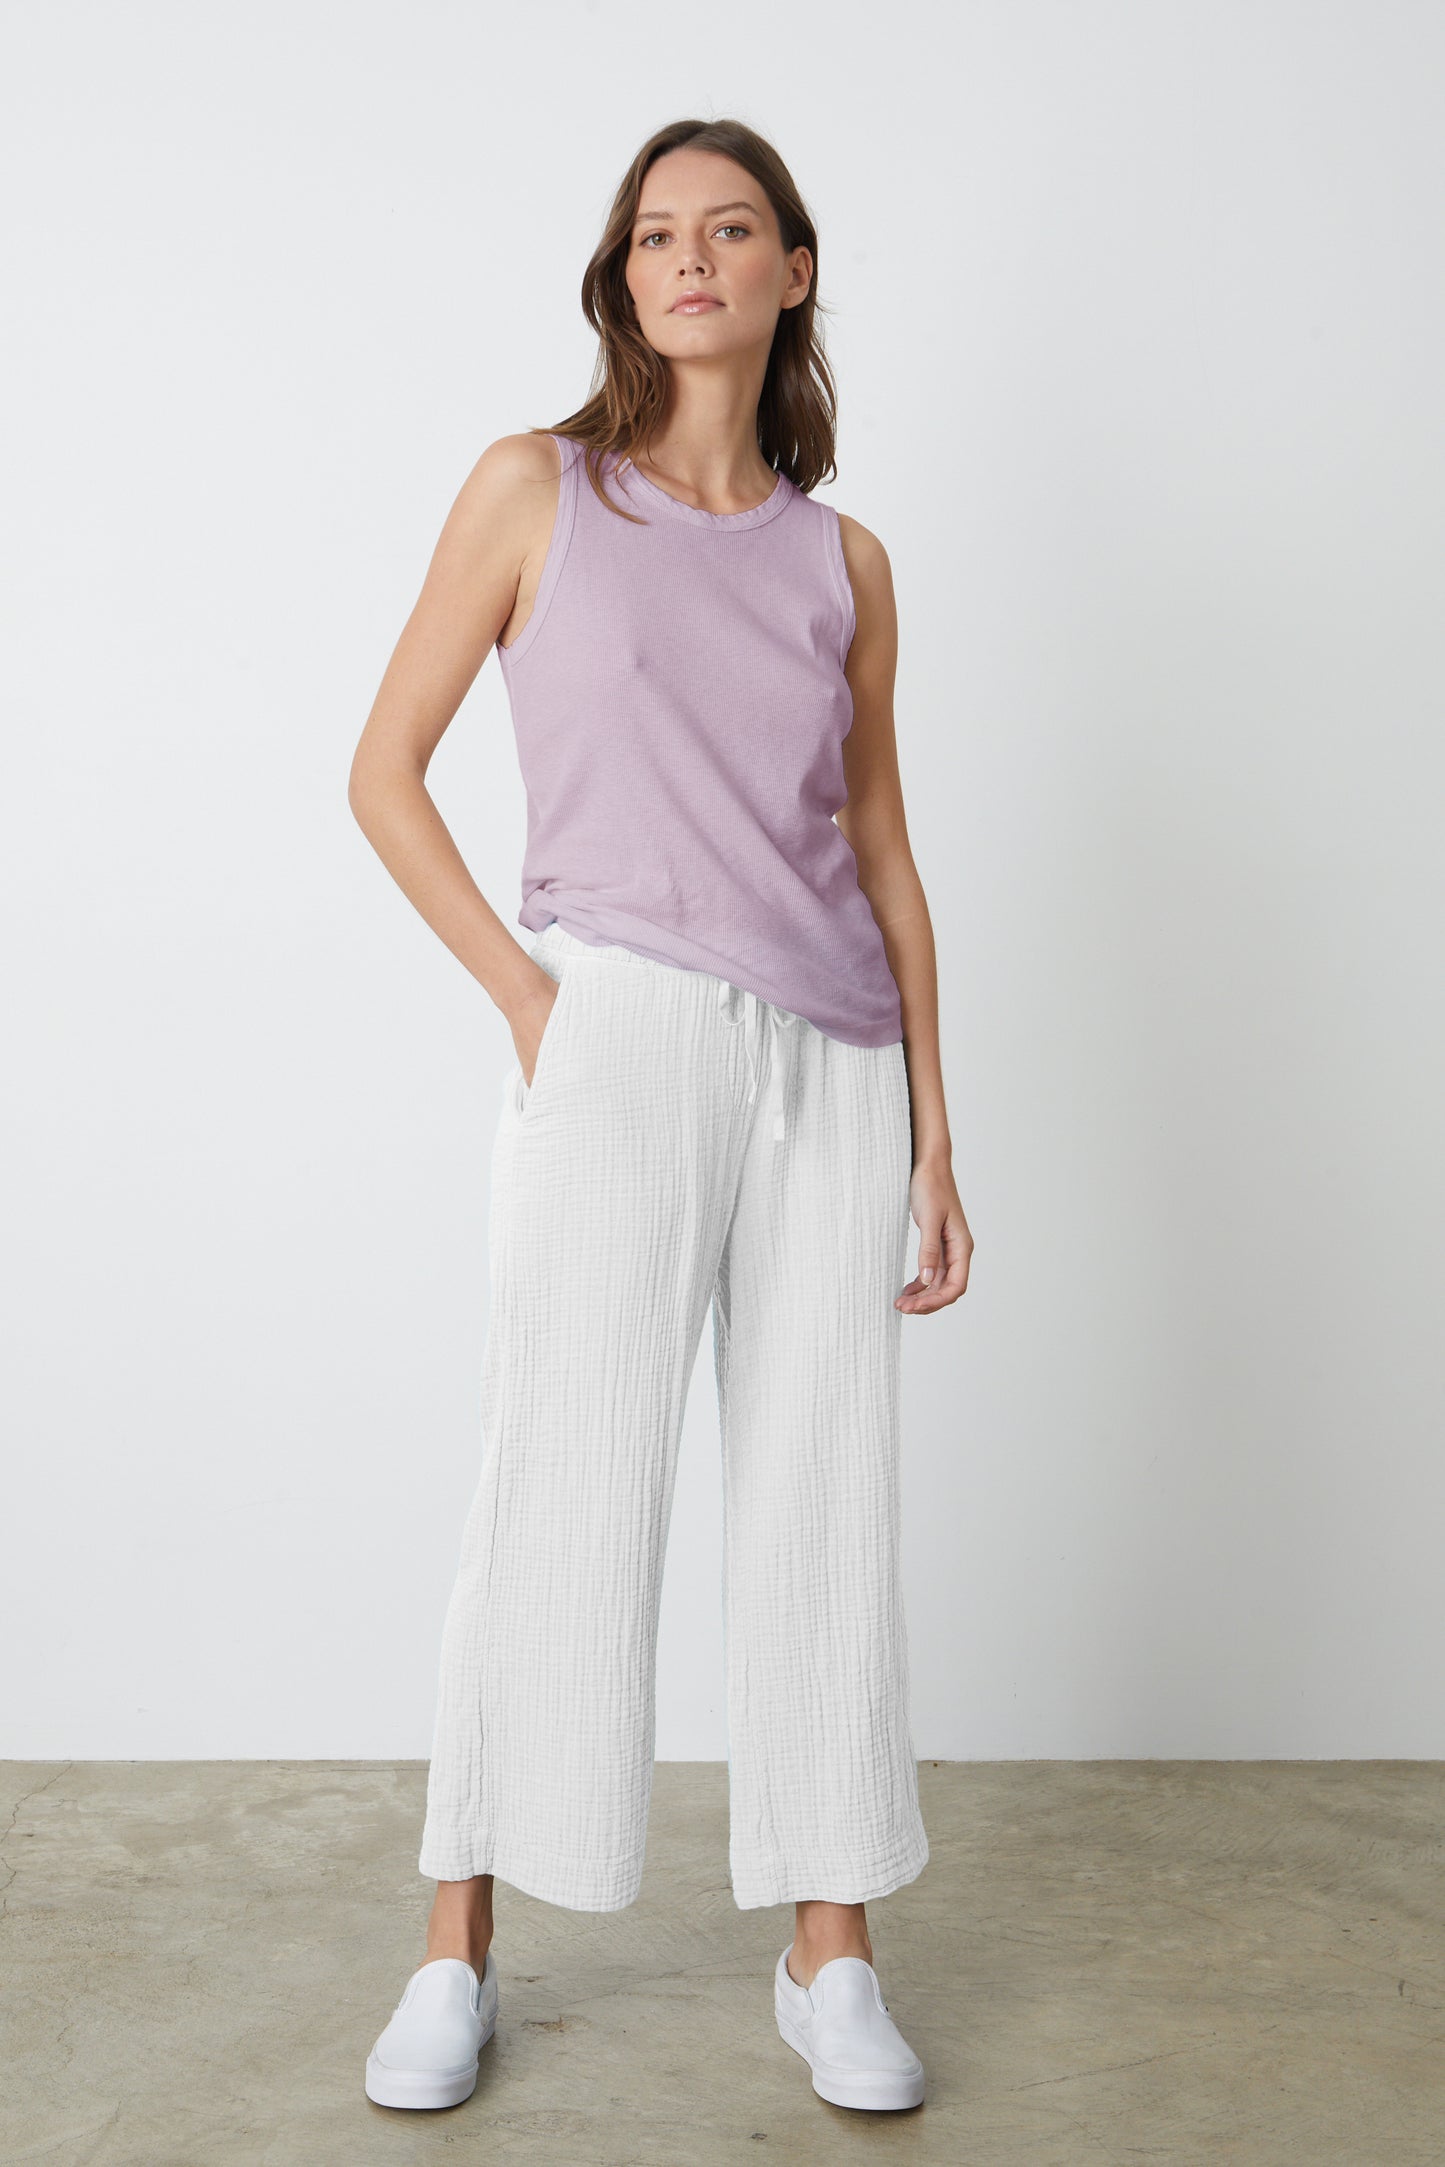 The model is wearing a white Velvet by Graham & Spencer FRANNY COTTON GAUZE PANT and lilac tank top.-26577359438017